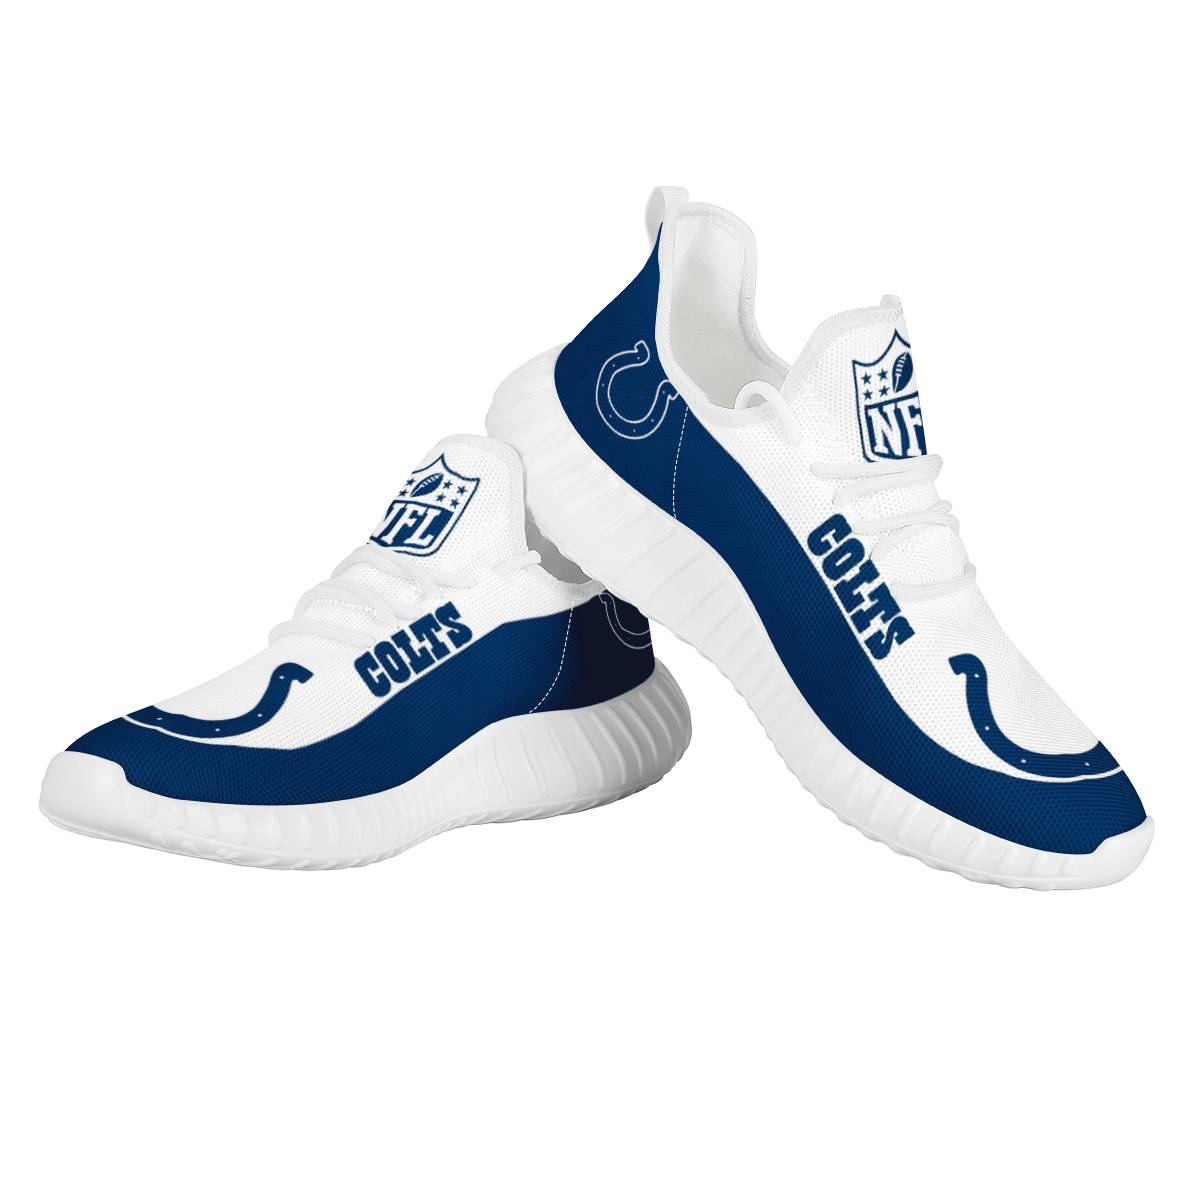 Women's Indianapolis Colts Mesh Knit Sneakers/Shoes 003